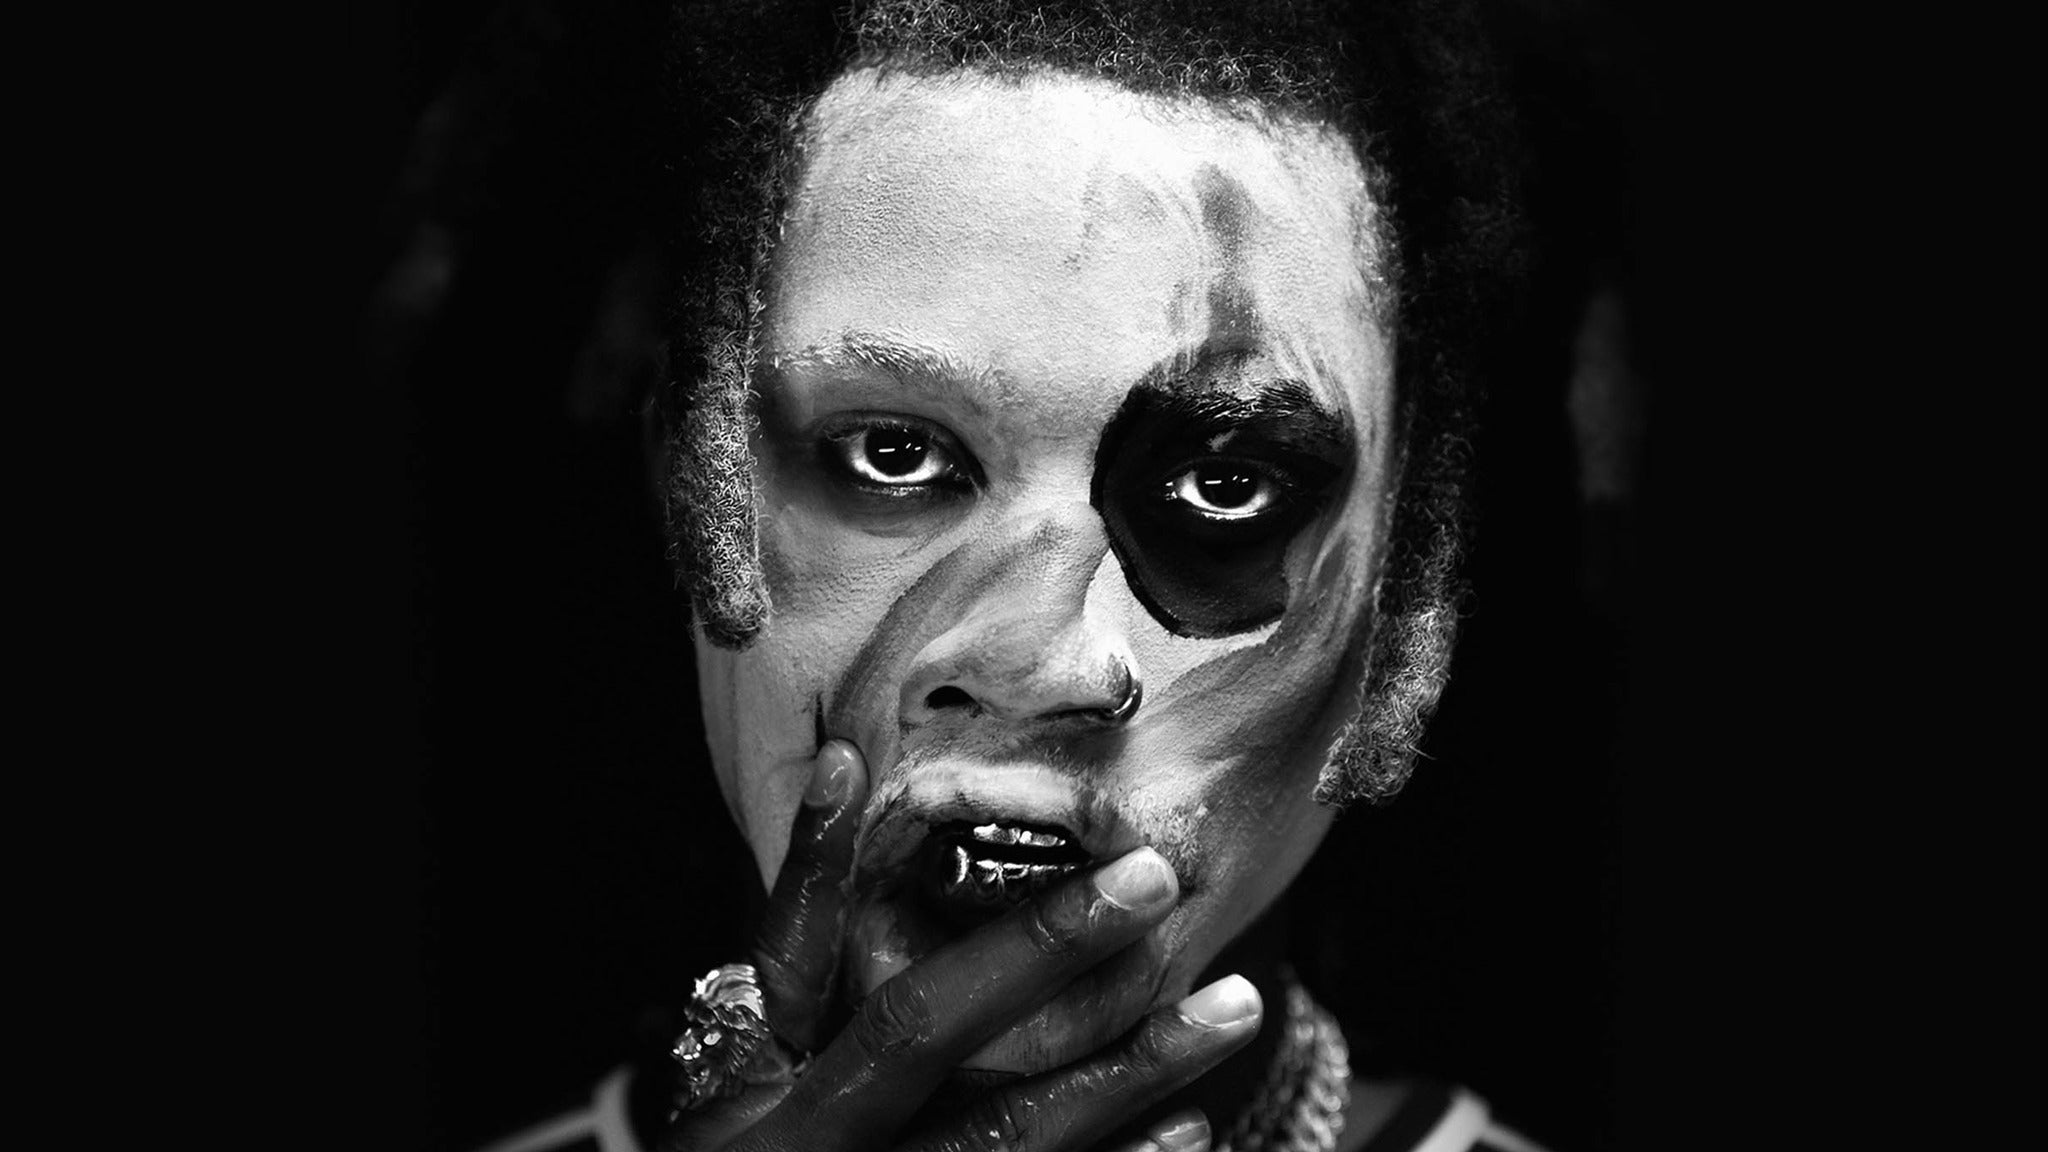 Denzel Curry in Los Angeles promo photo for Exclusive presale offer code